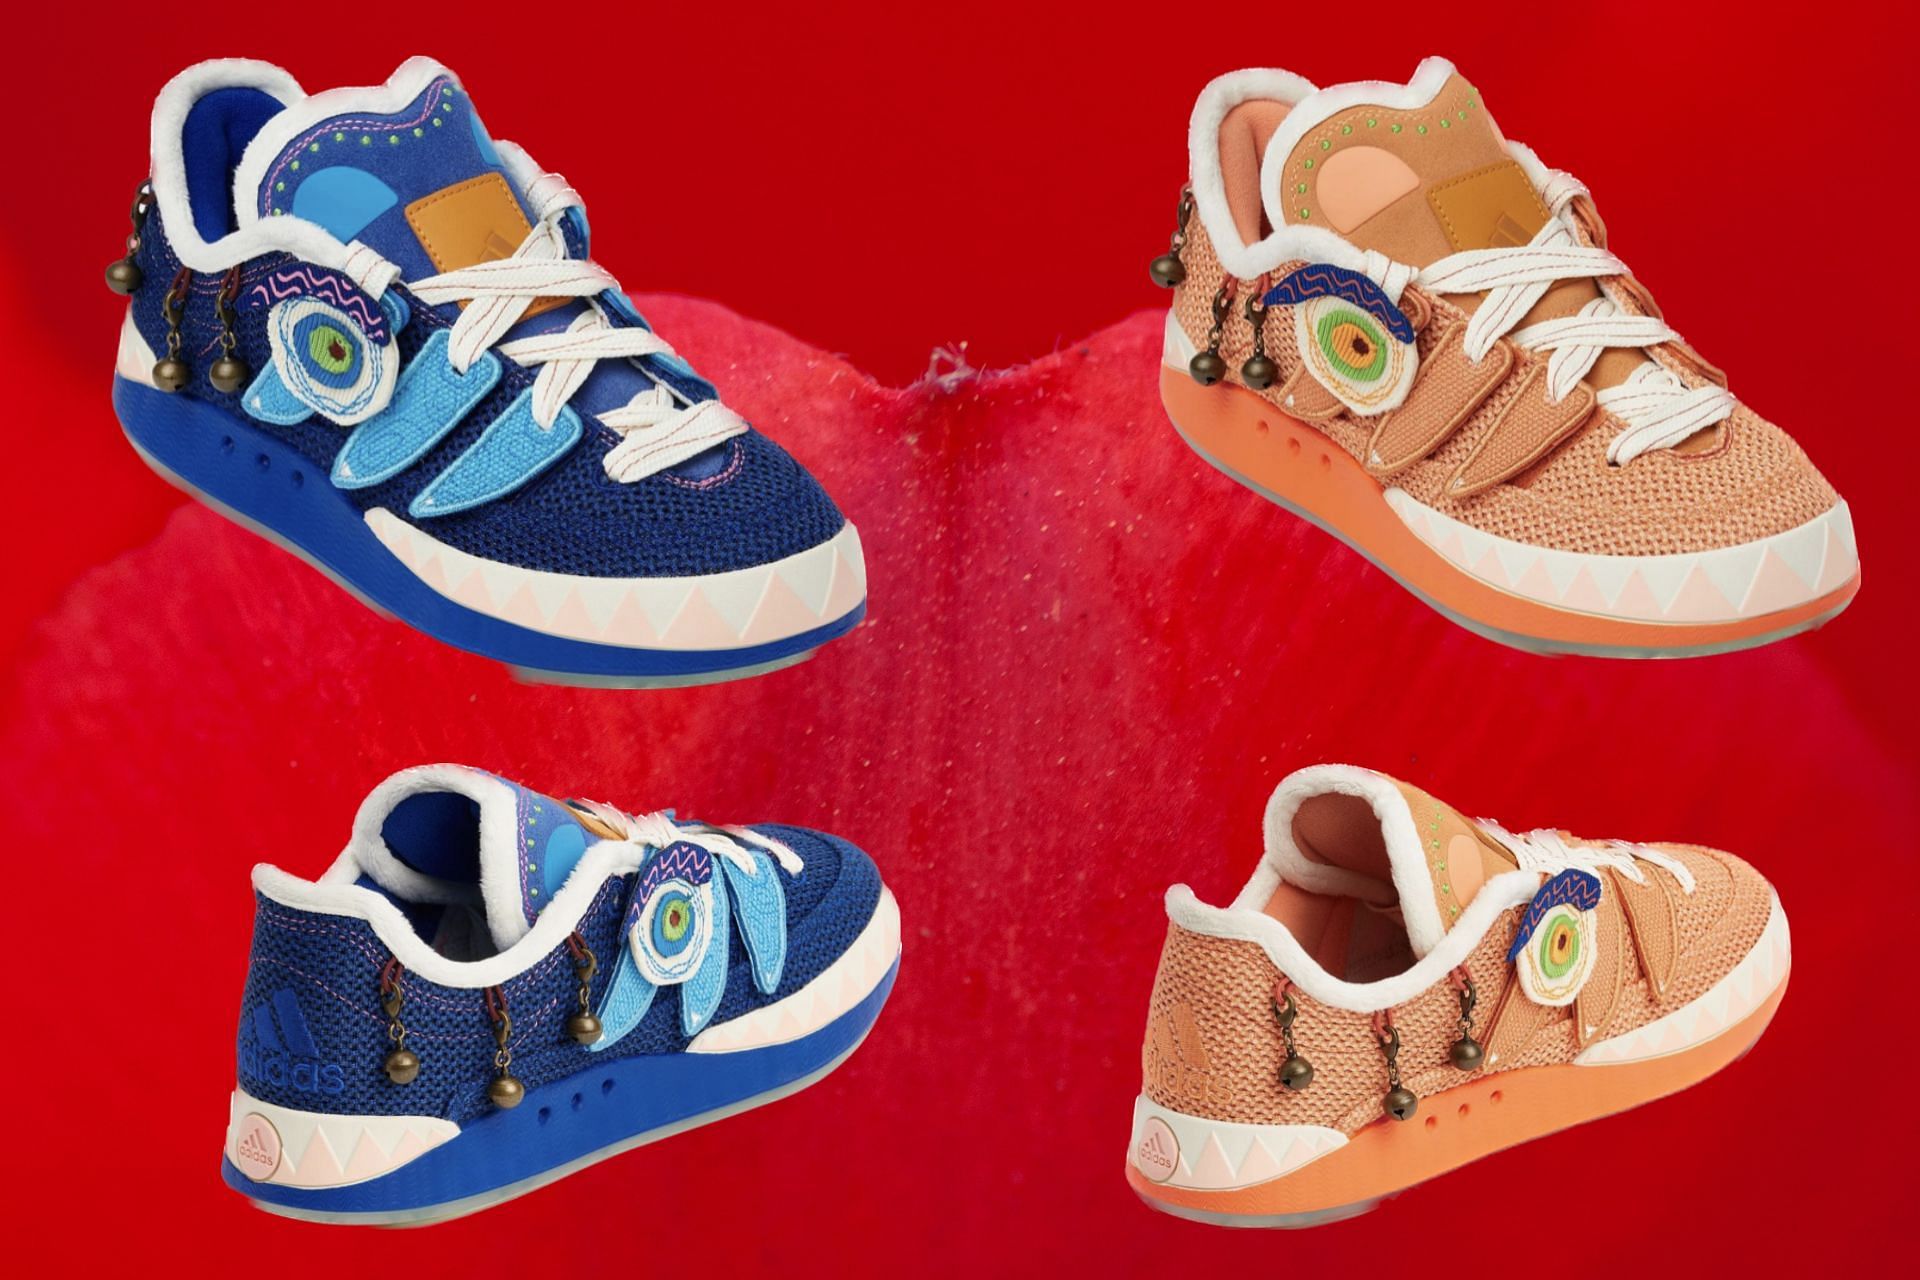 Take a closer look at the ADIMATIC colorways (Image via Melting Sadness)